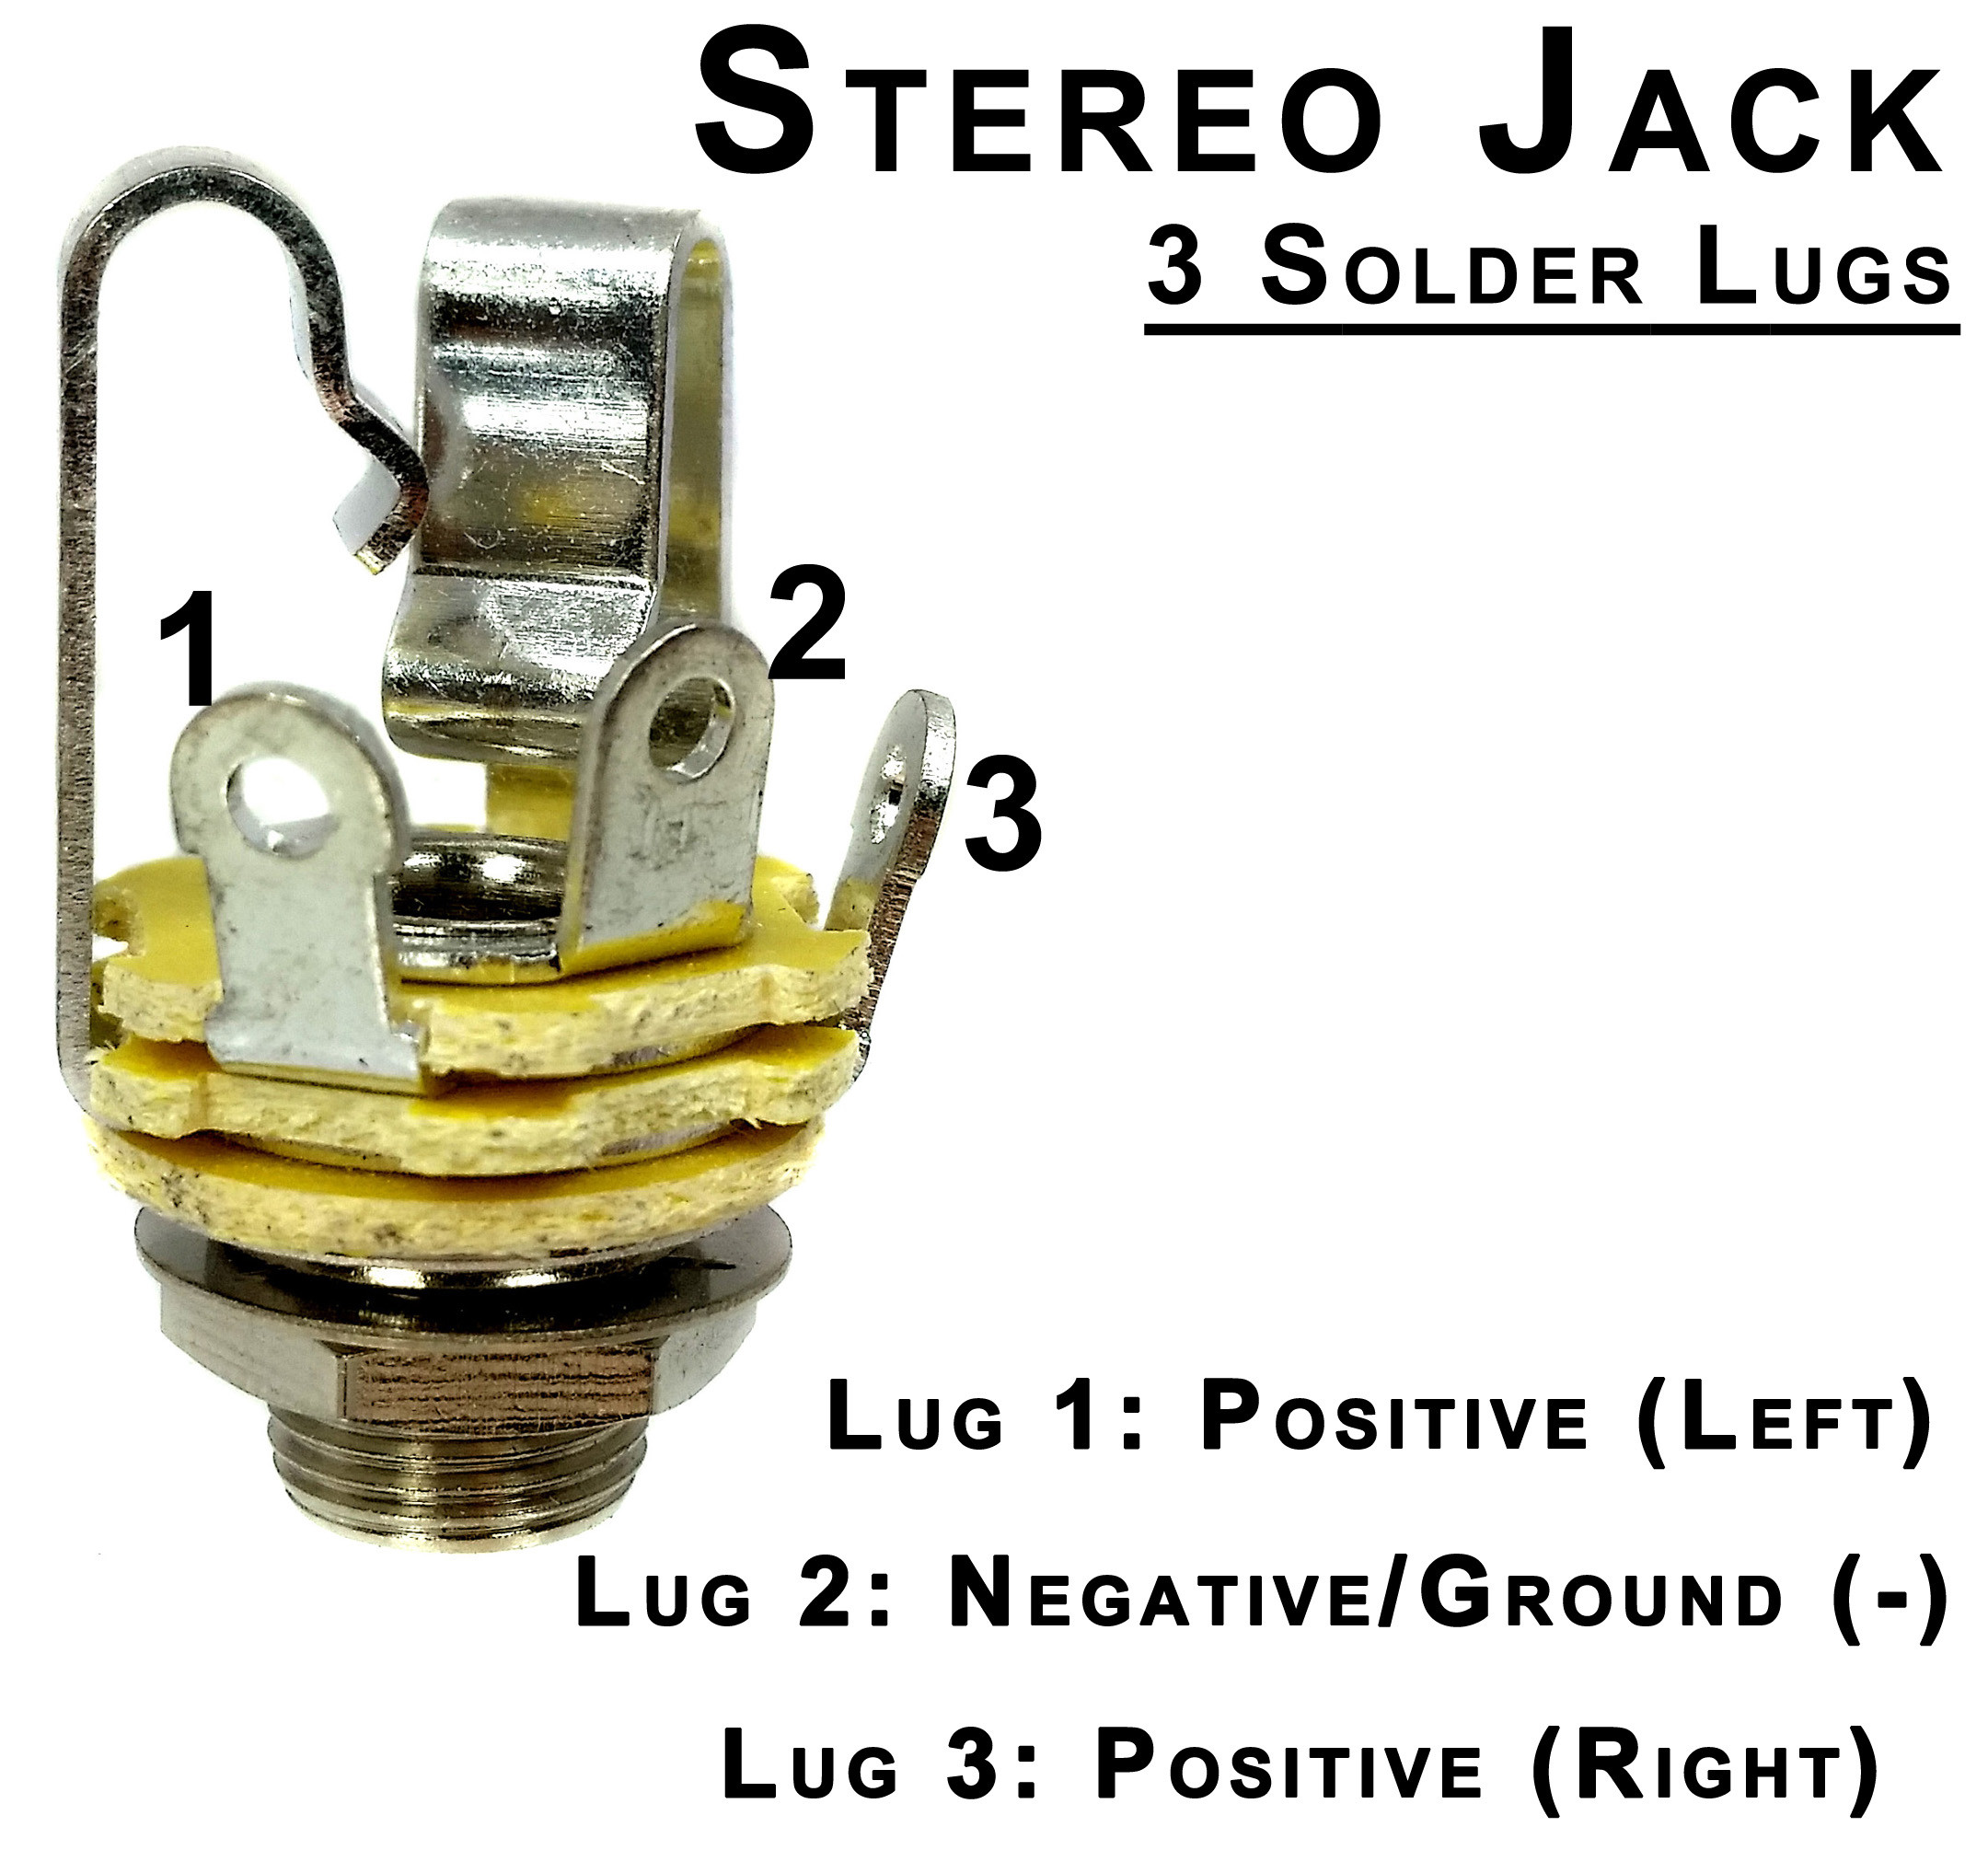 Stereo Jack Annotated